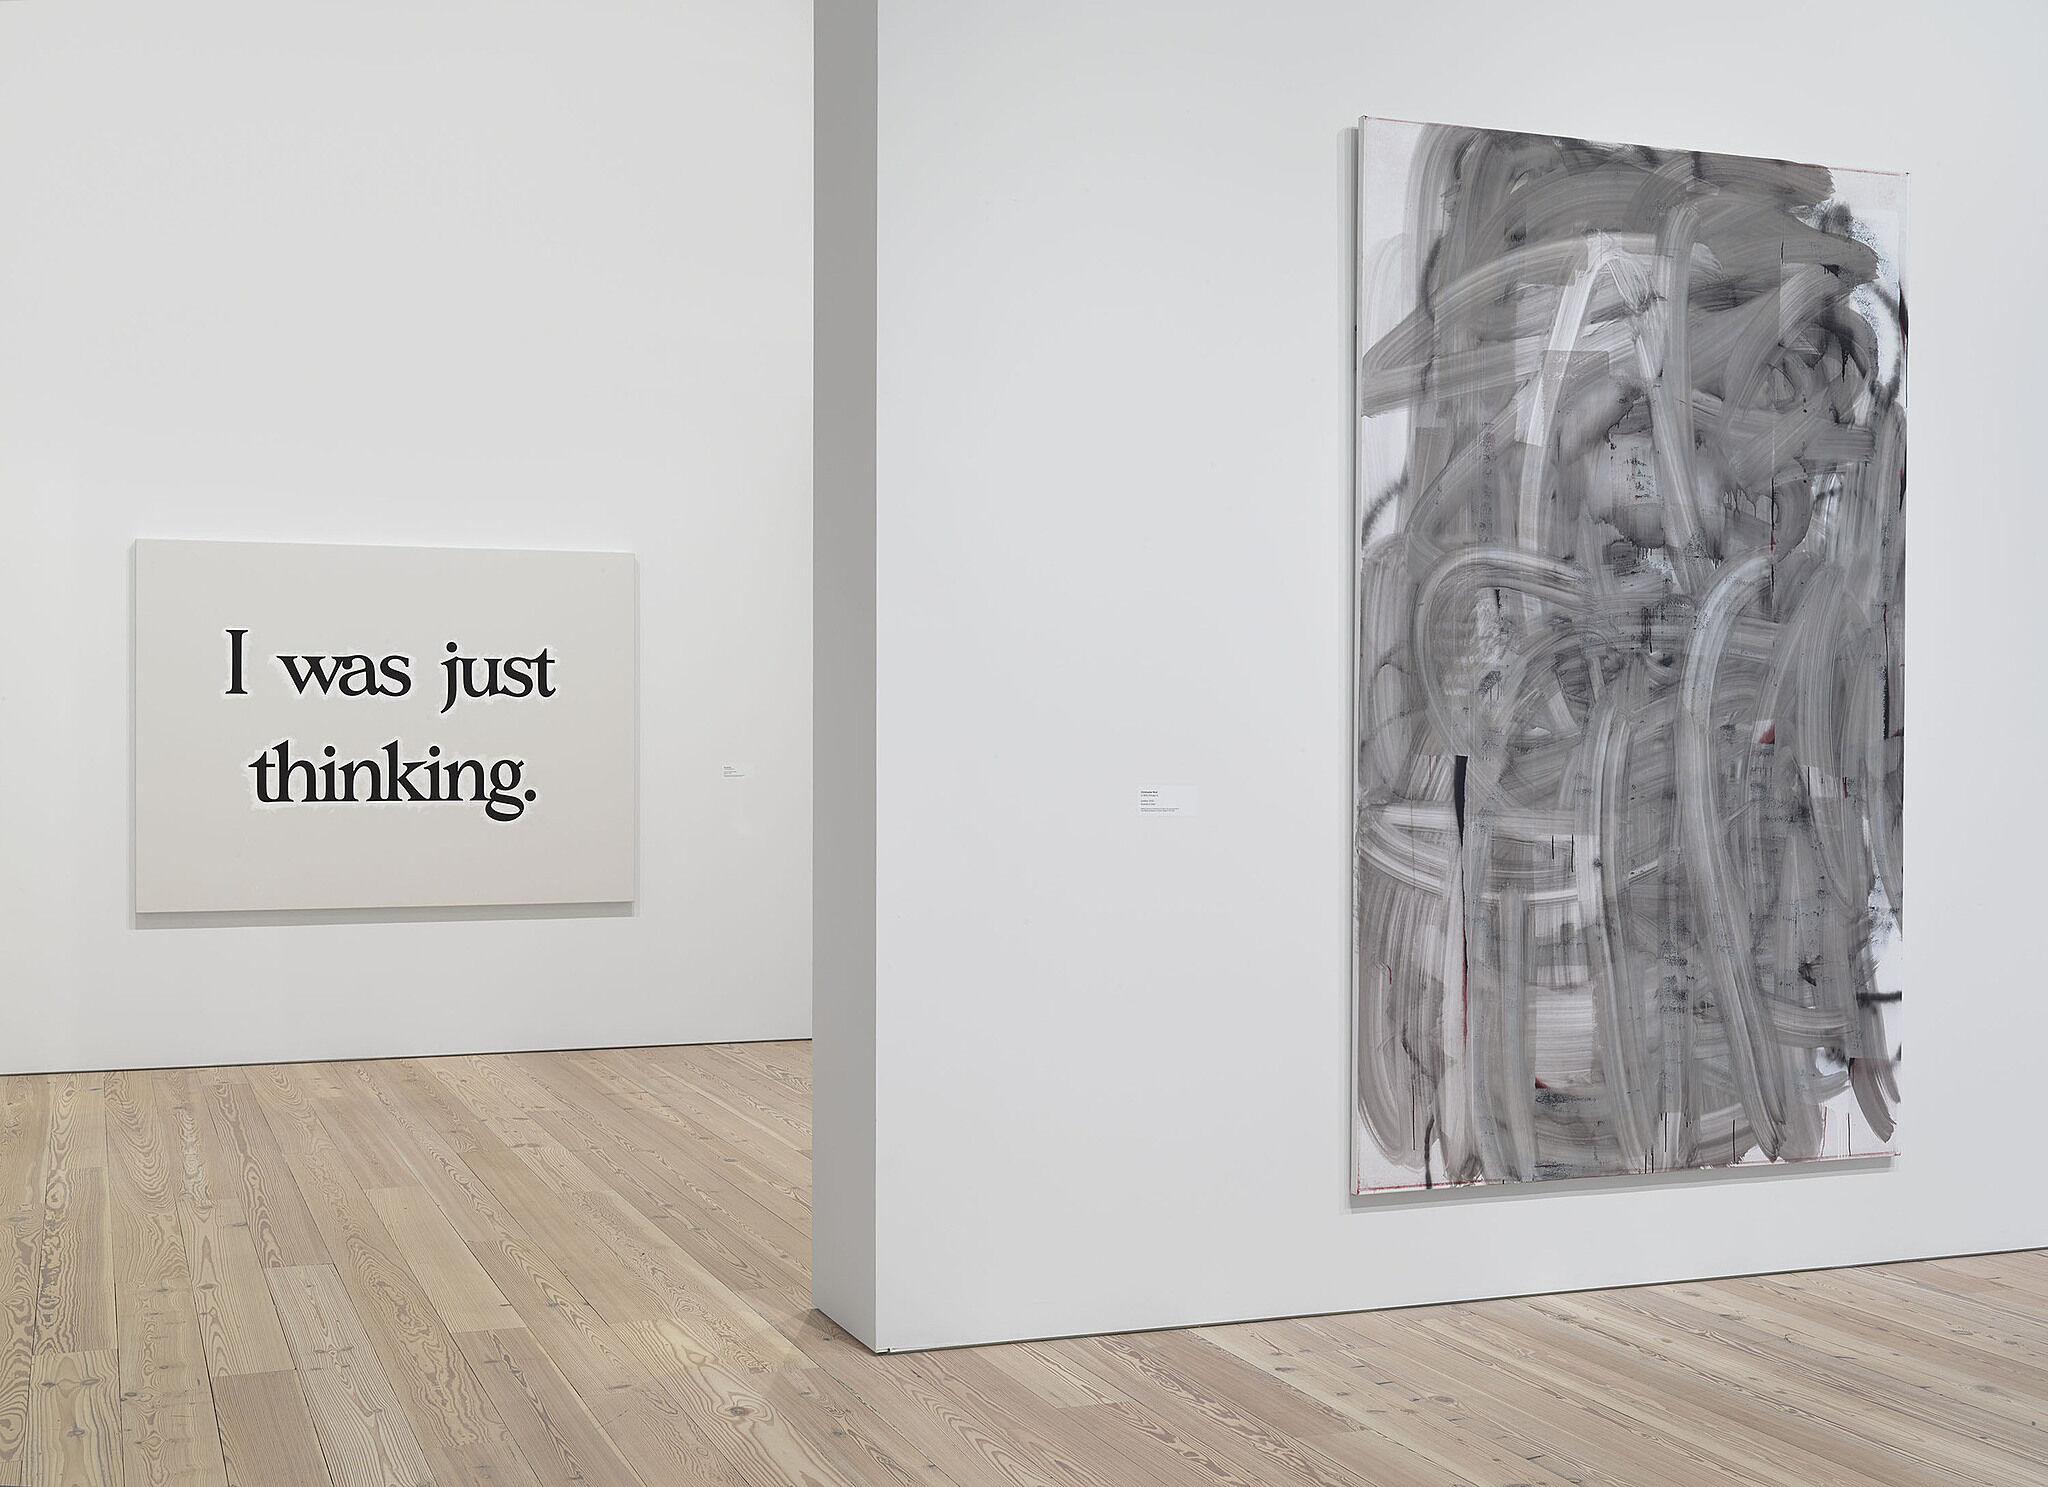 A black and white abstract artwork and a poster with text "I was just thinking" in the gallery.